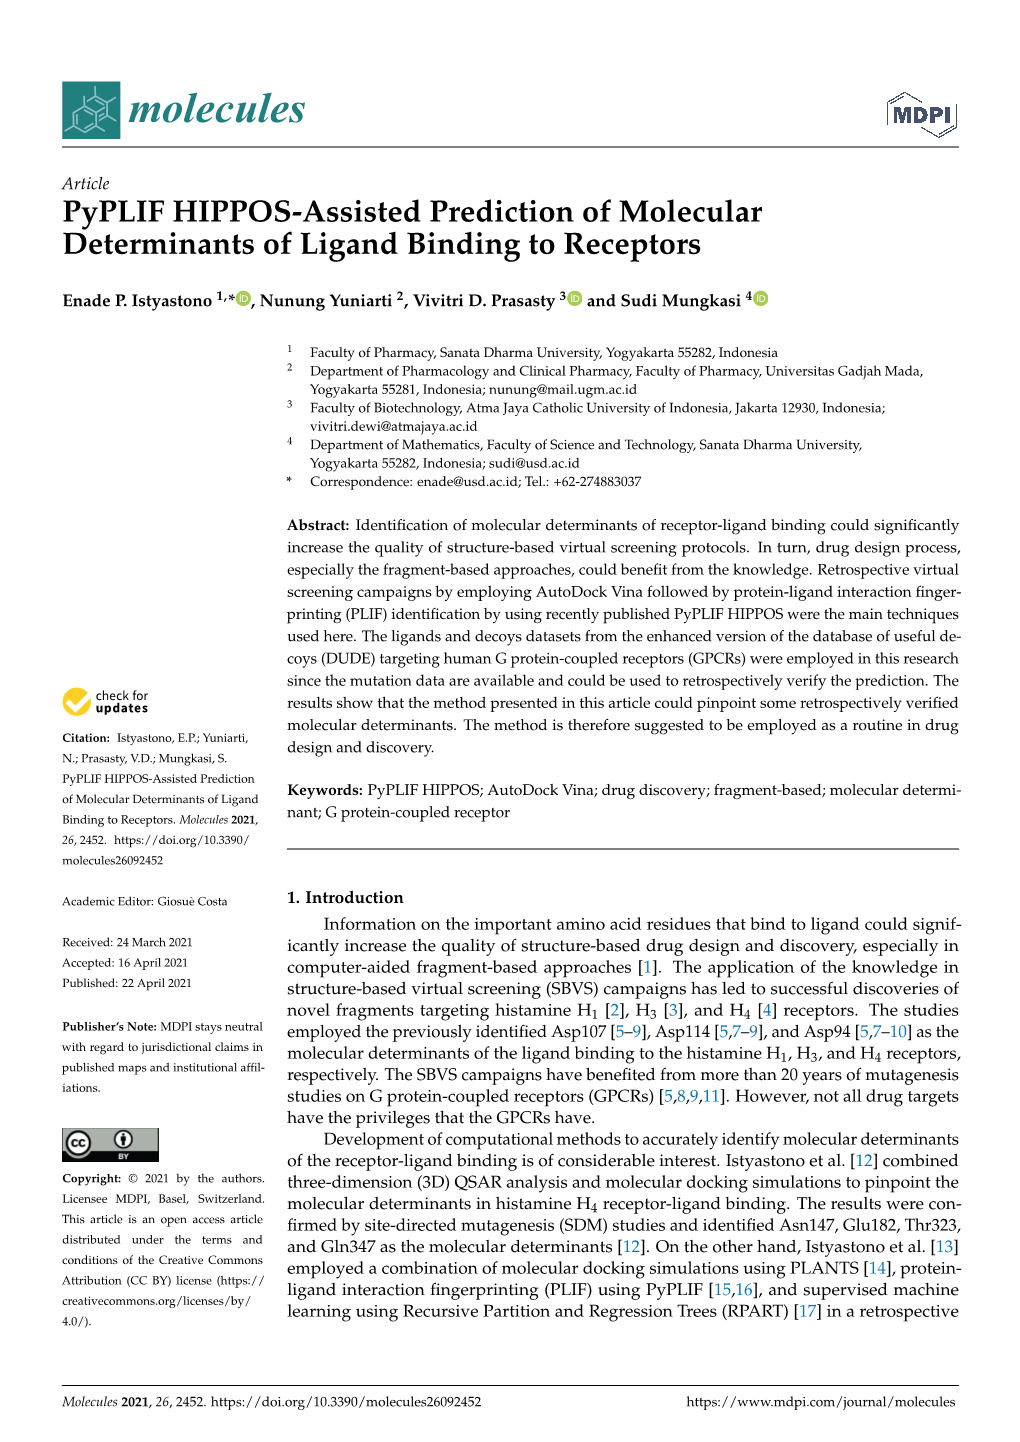 Pyplif HIPPOS-Assisted Prediction of Molecular Determinants of Ligand Binding to Receptors